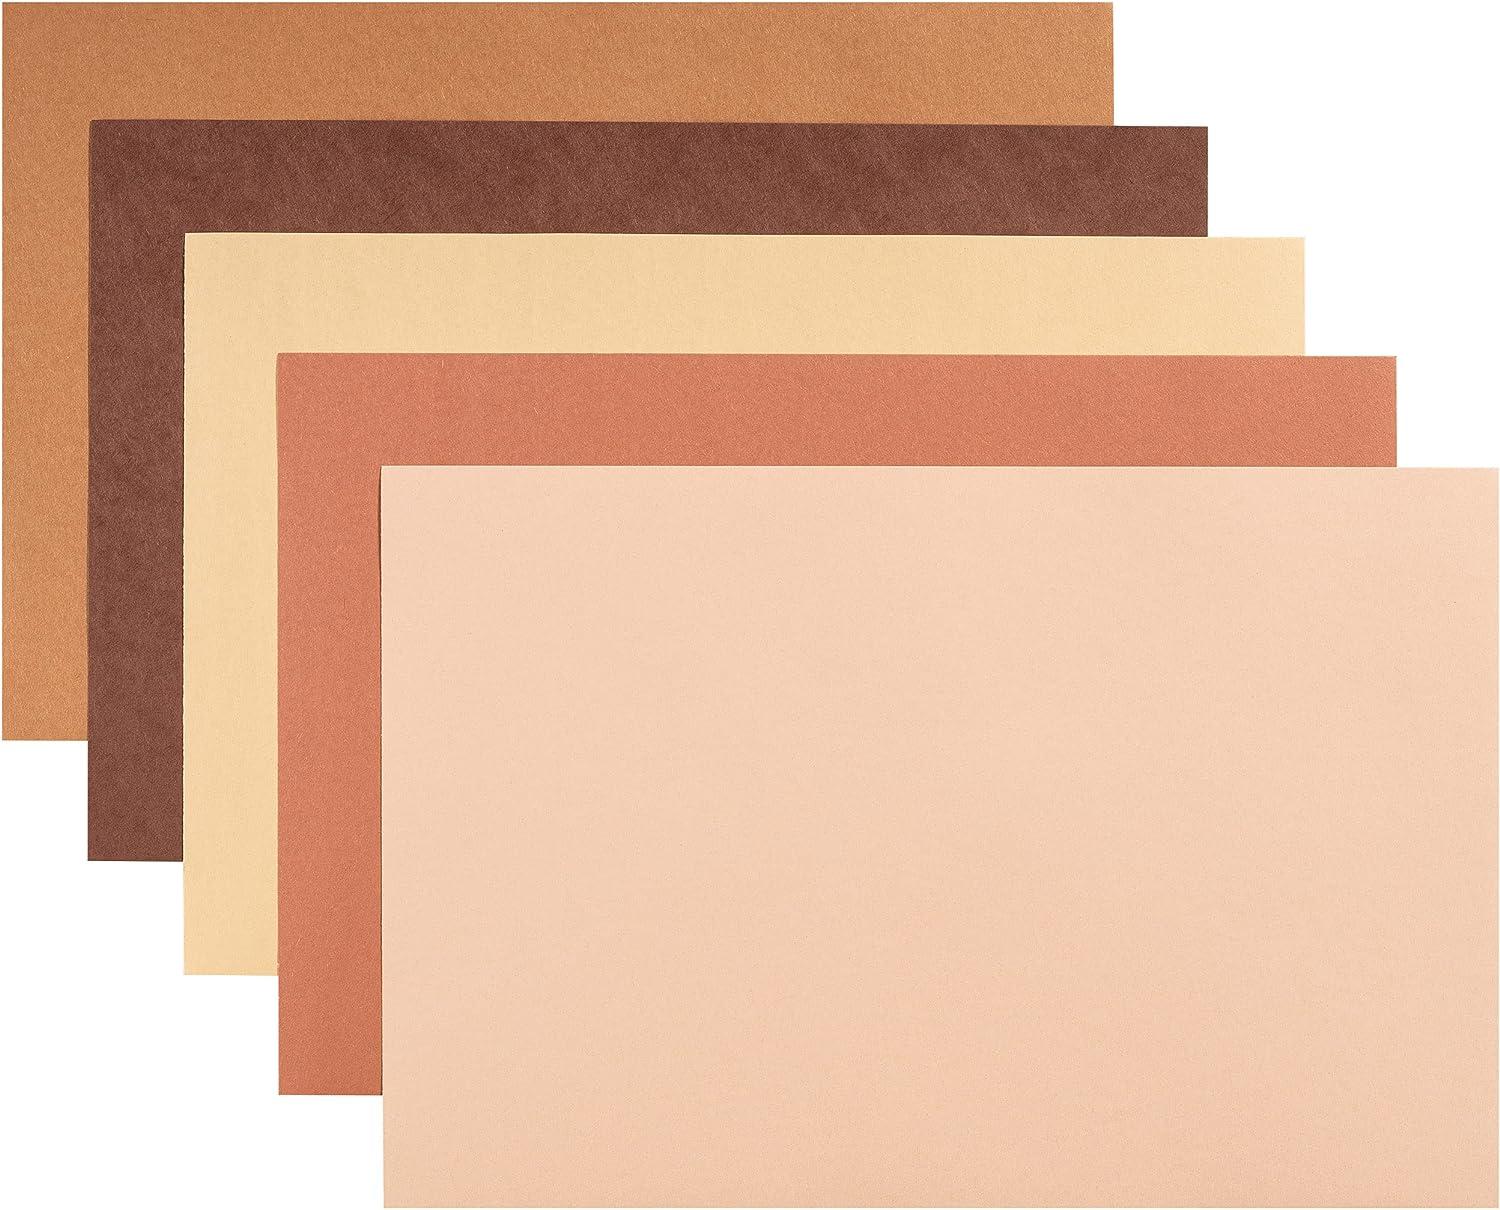 Prang (Formerly SunWorks) Construction Paper, 10 Assorted Colors, 18 x  24, 100 Sheets